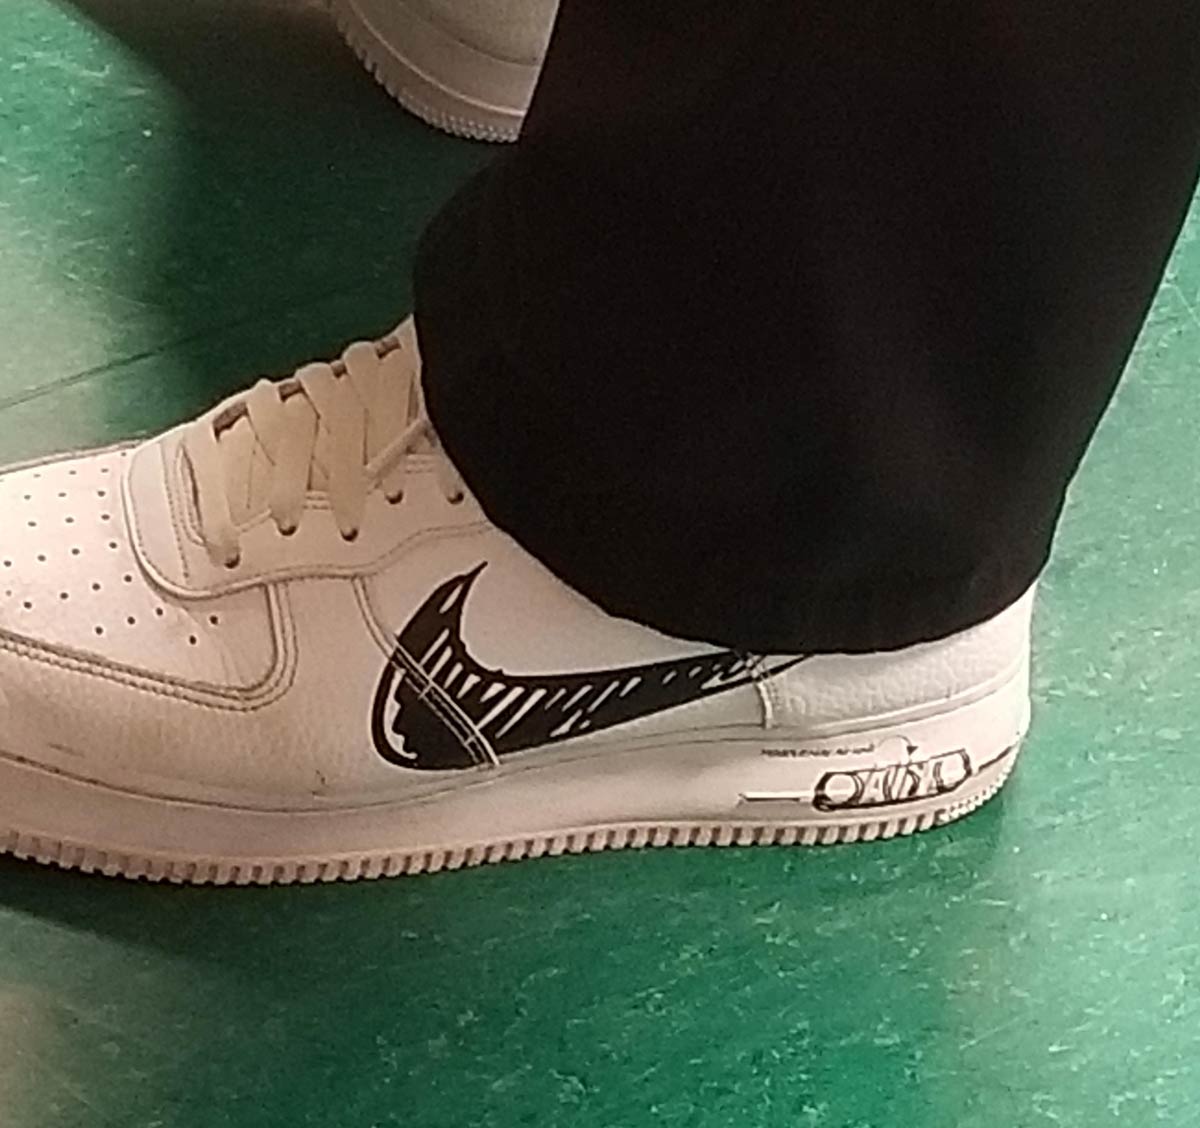 In the hospital, these are my nurse's shoes